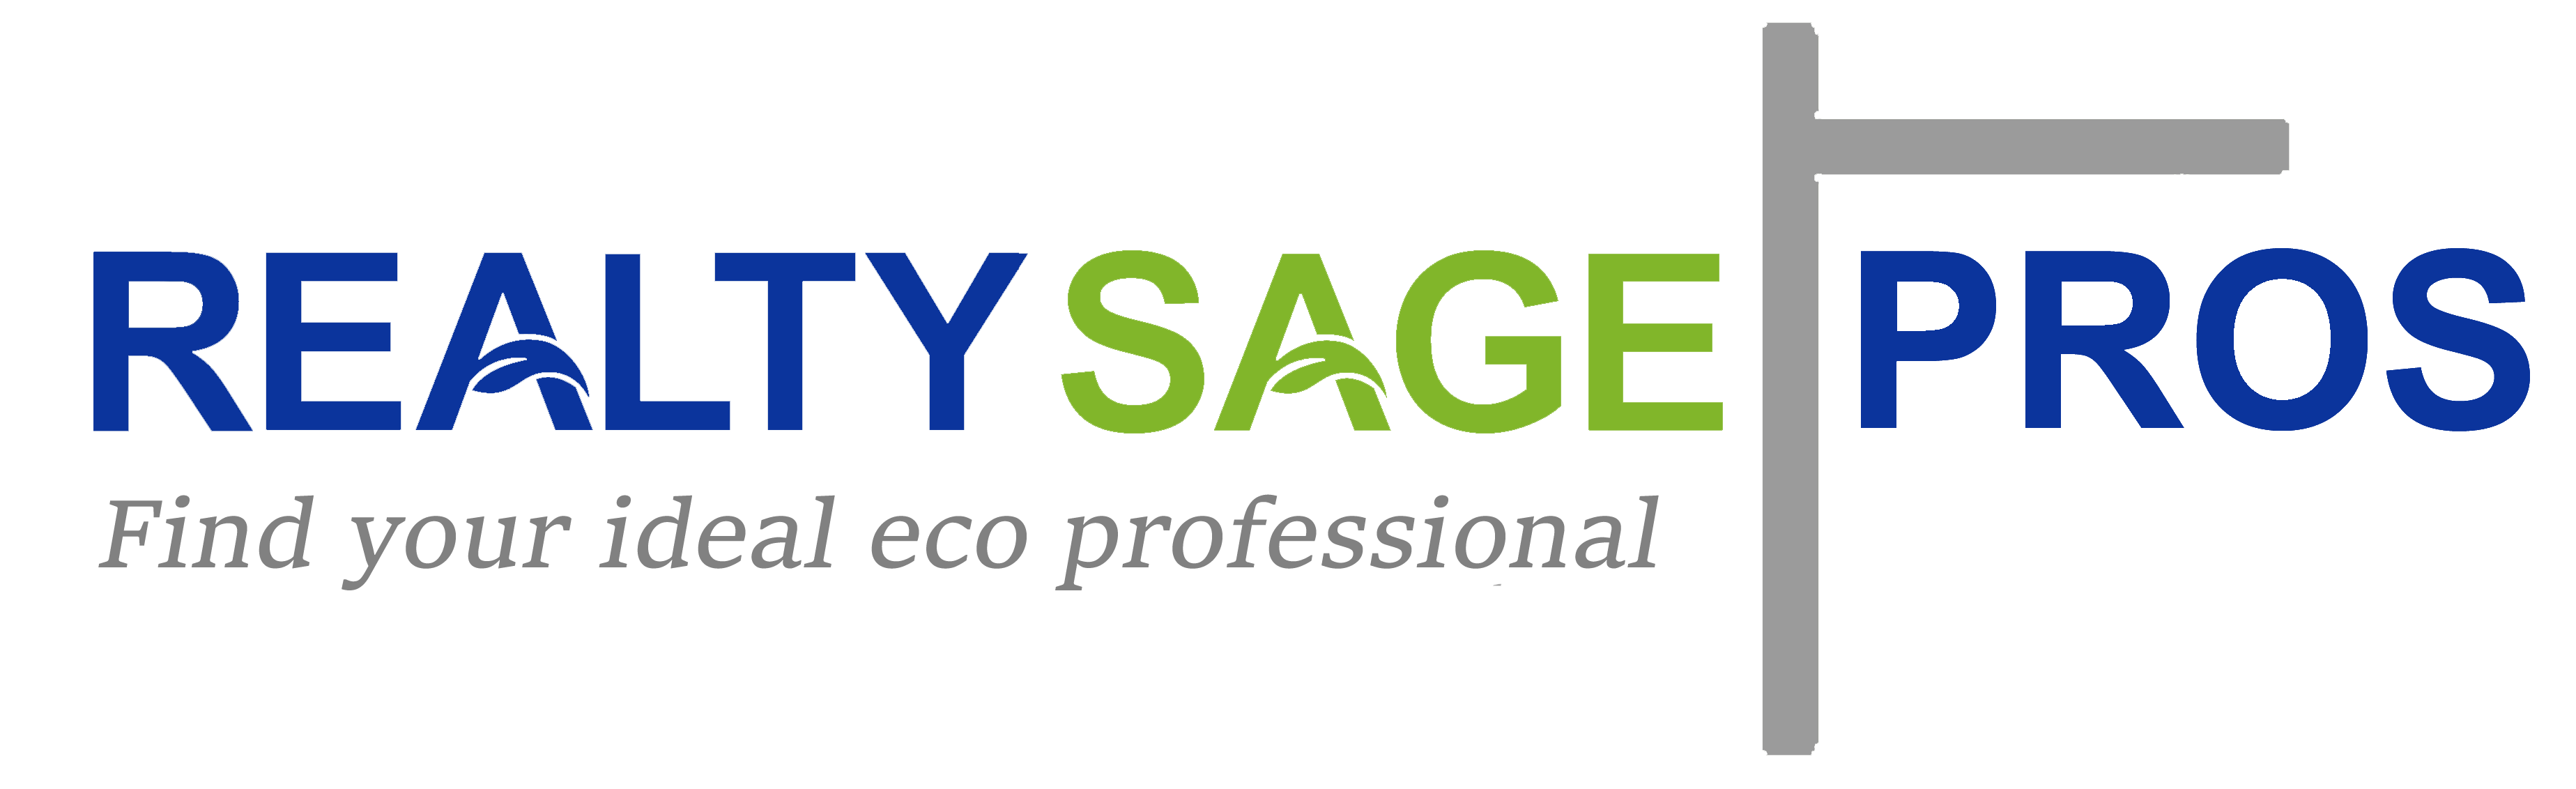 REALTY SAGE PROS